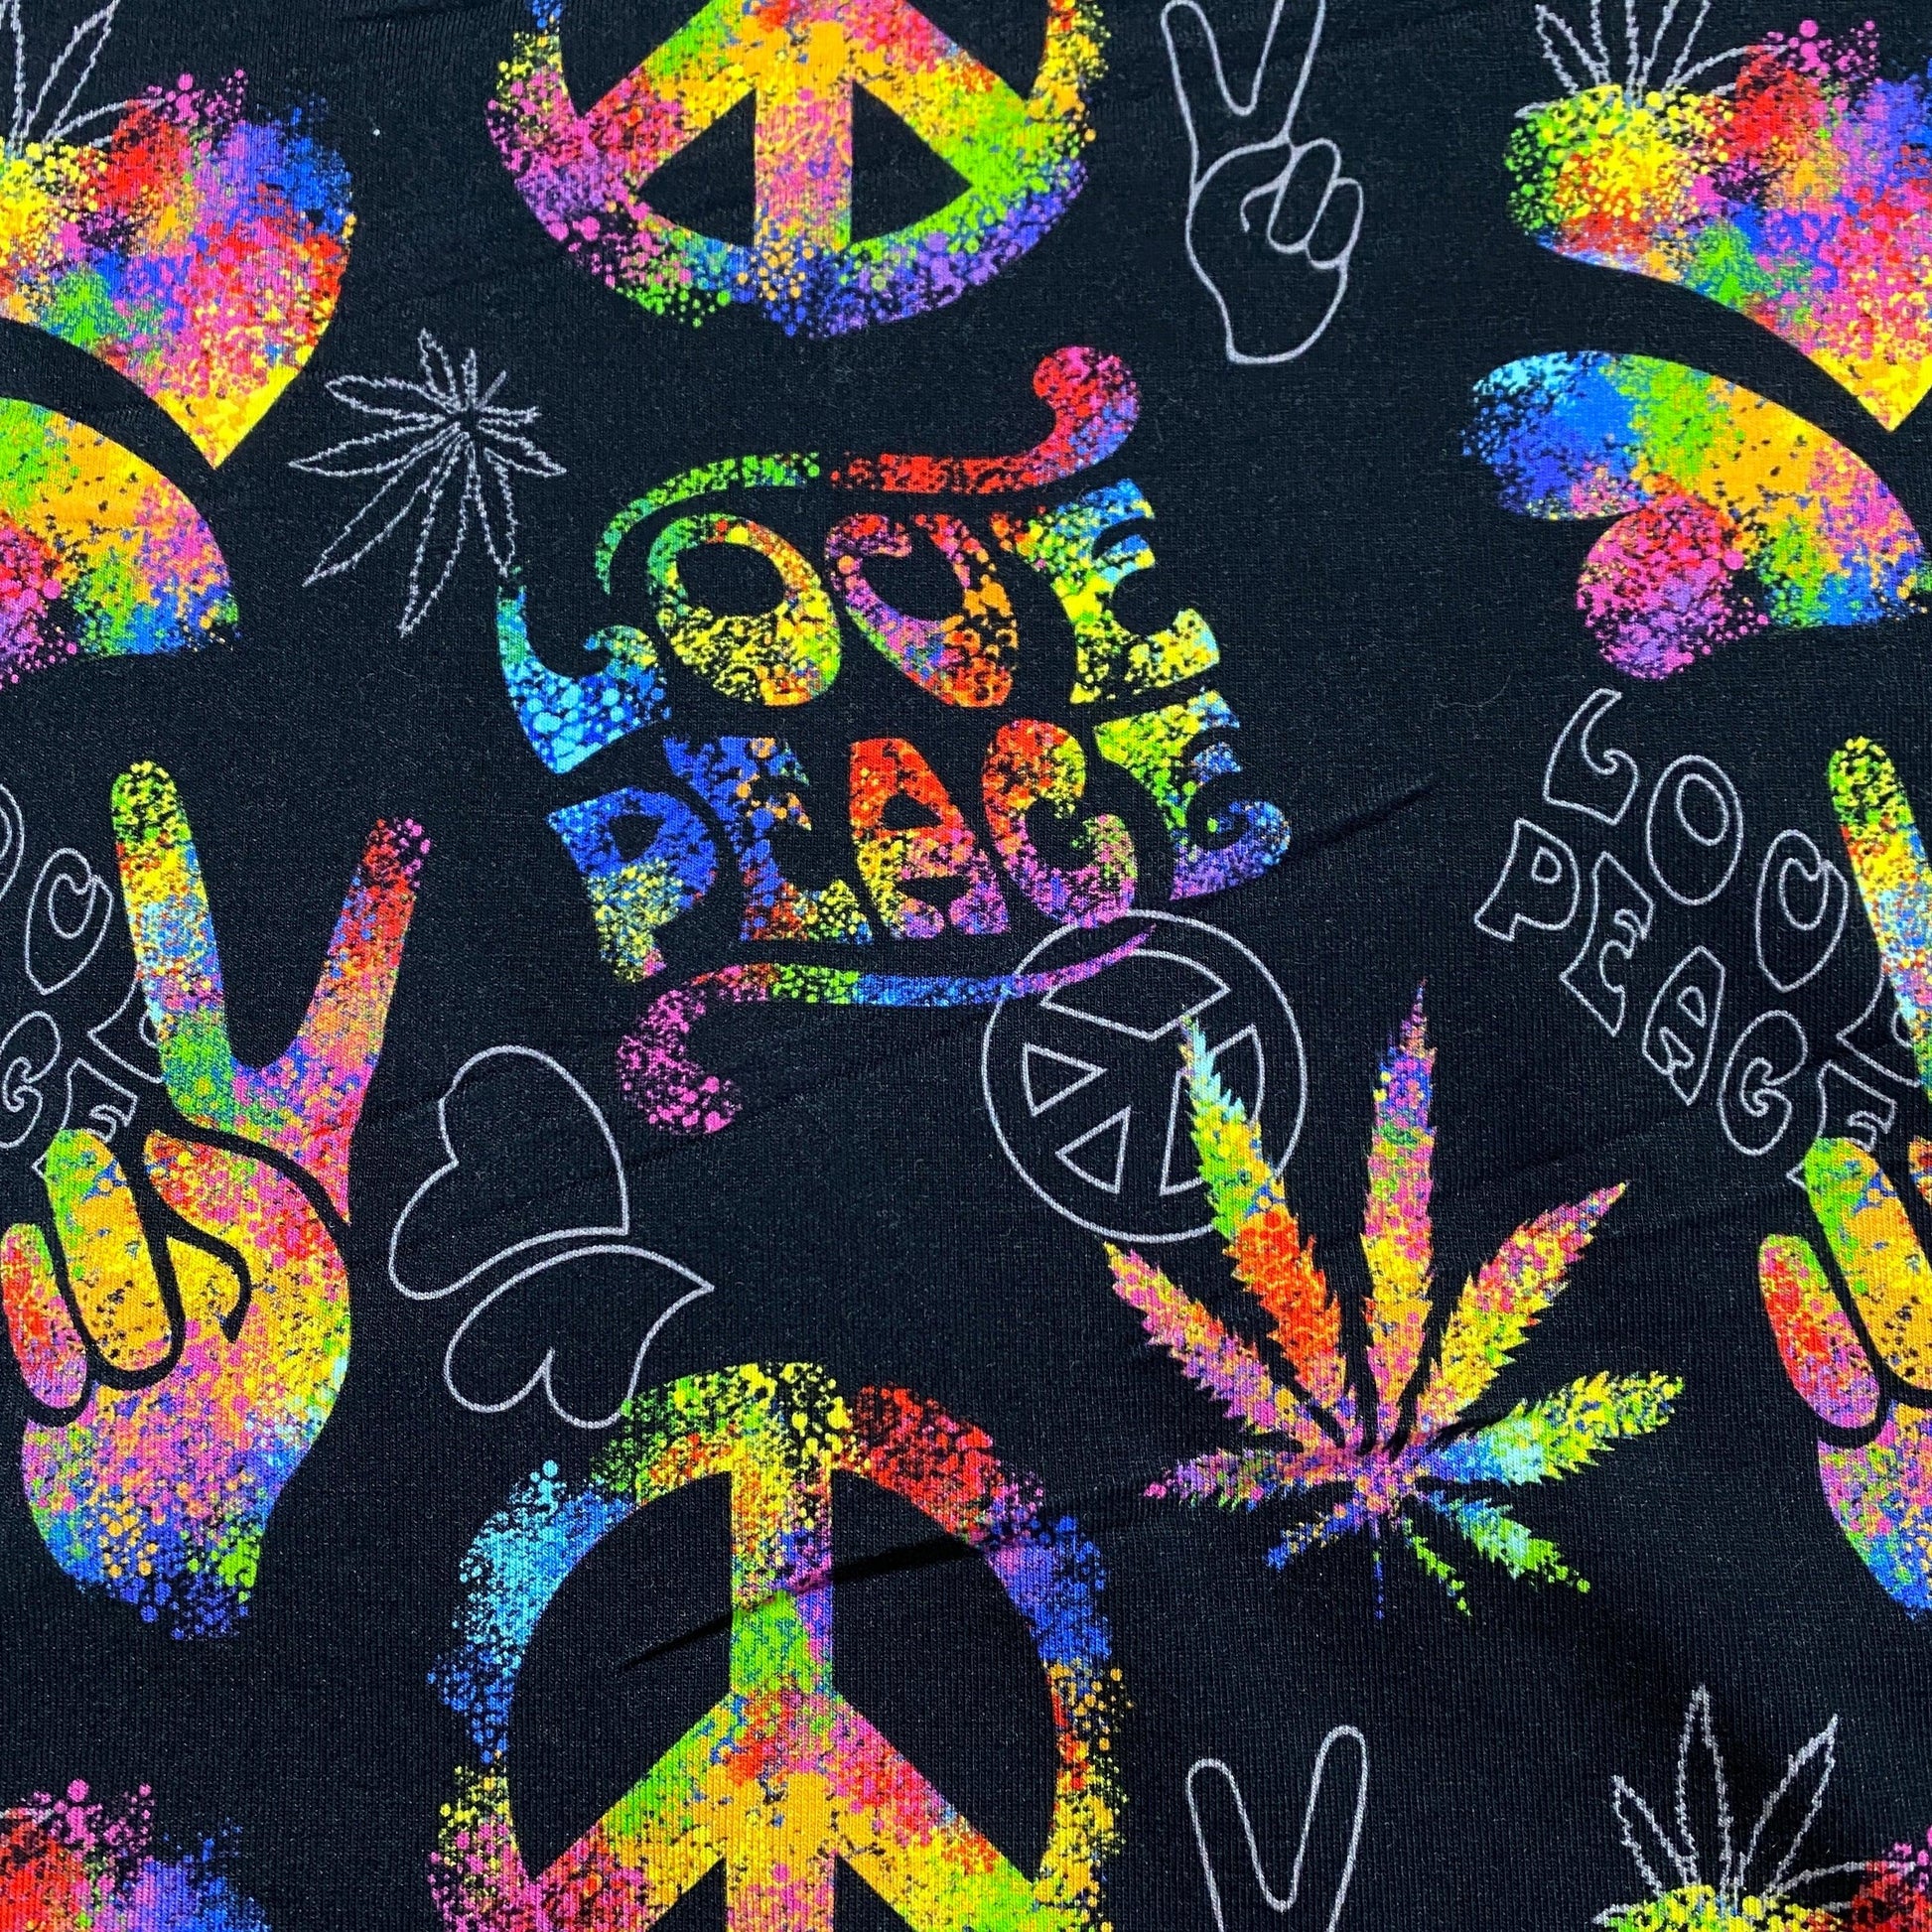 Love and Peace on Black 1 mil PUL Fabric - Made in the USA - Nature's Fabrics